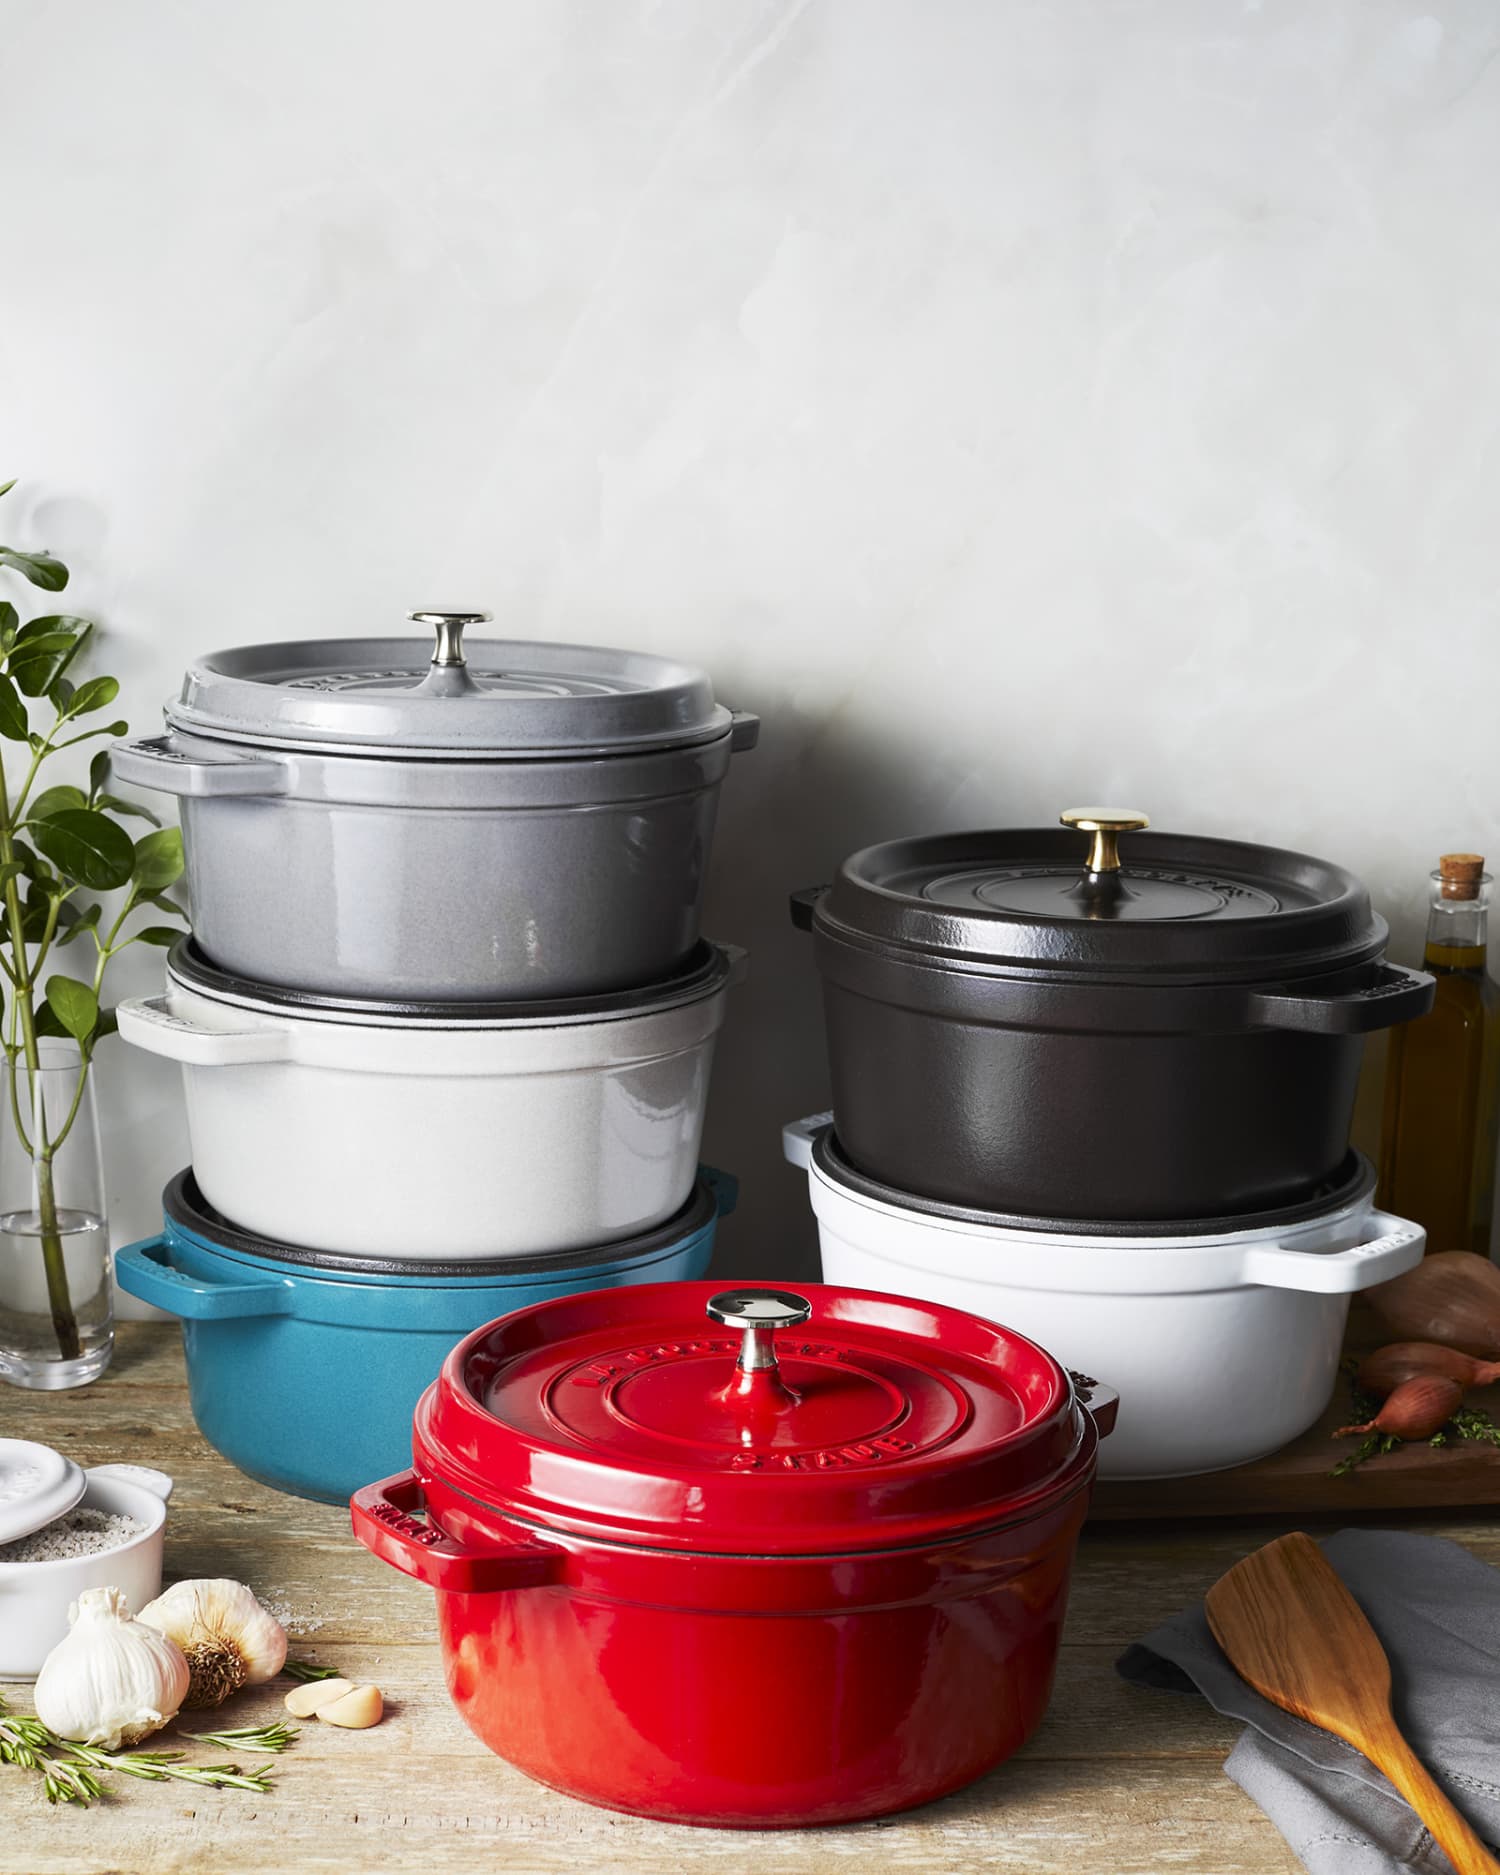 Staub’s Memorial Day Sale Has Major Savings on the Classic Cocotte and More Cookware Favorites